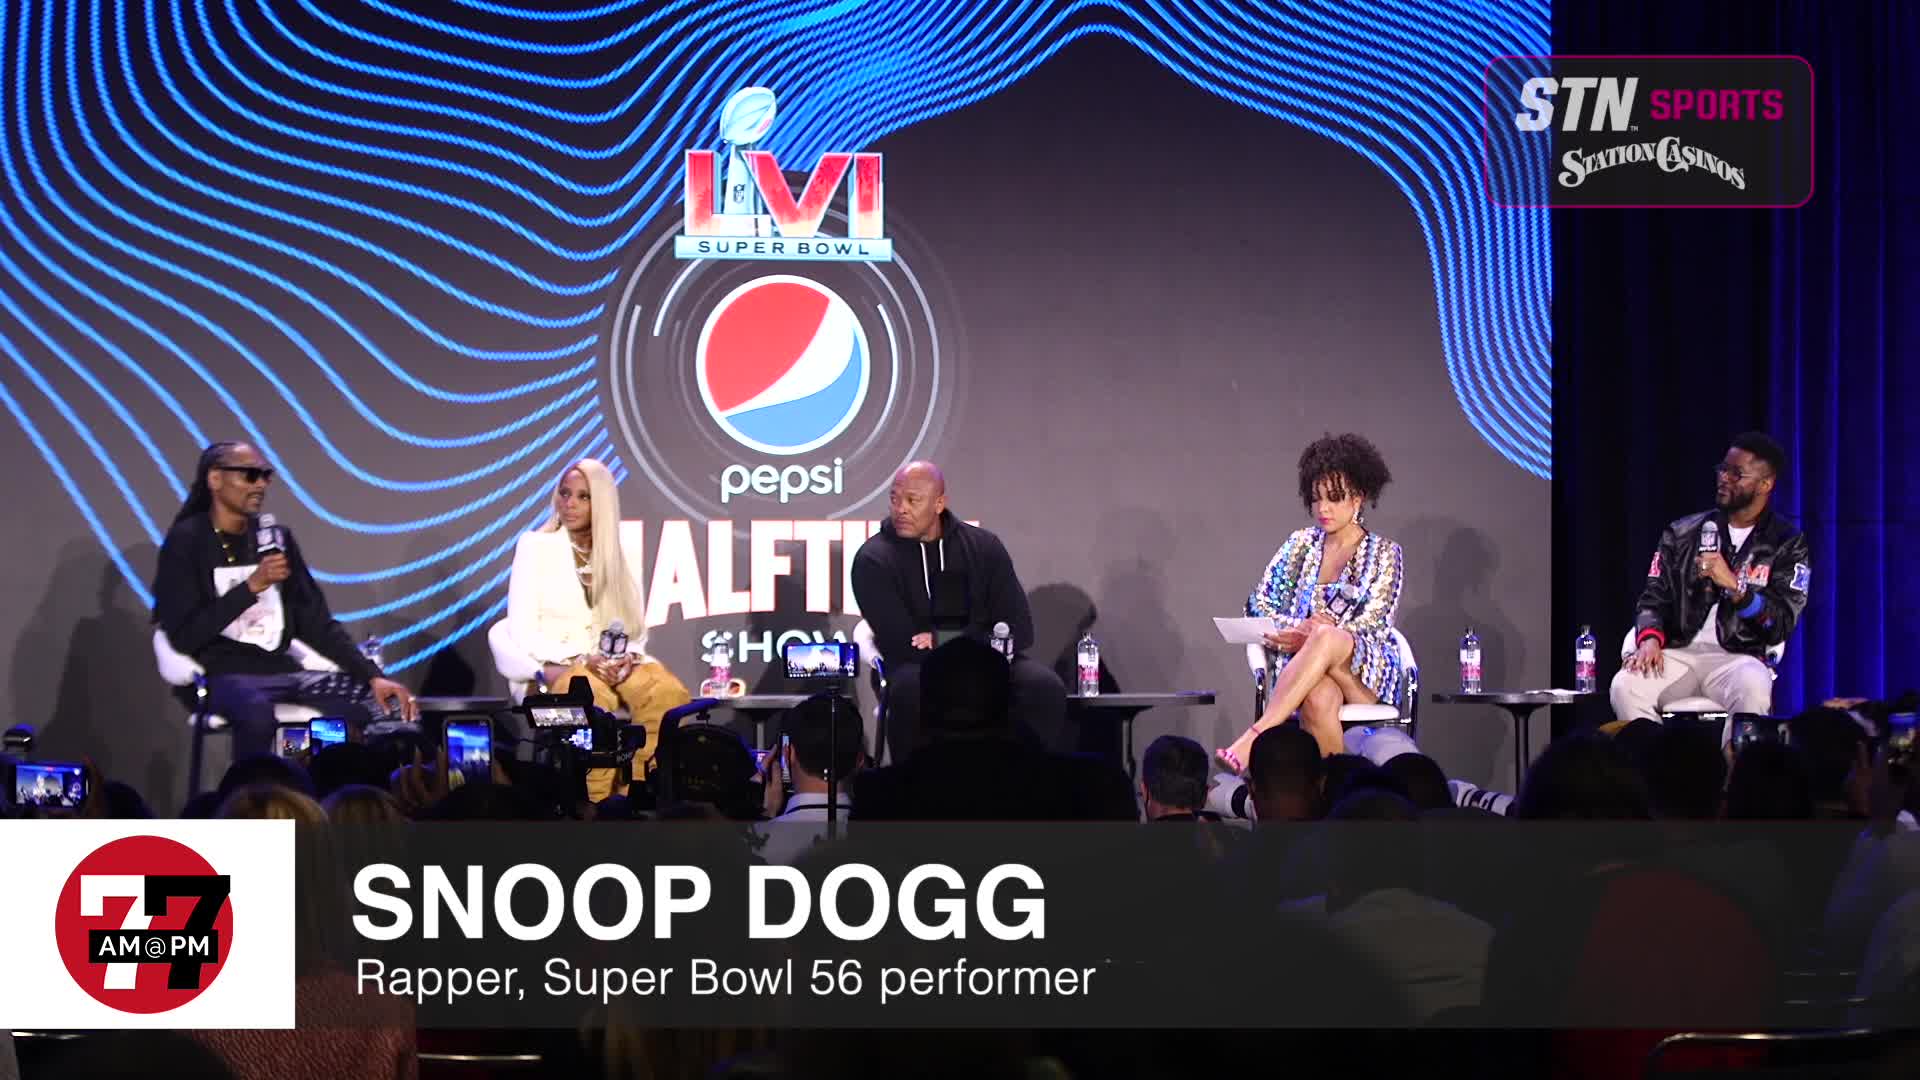 7@7PM Snoop Dogg on the Super Bowl Halftime Show